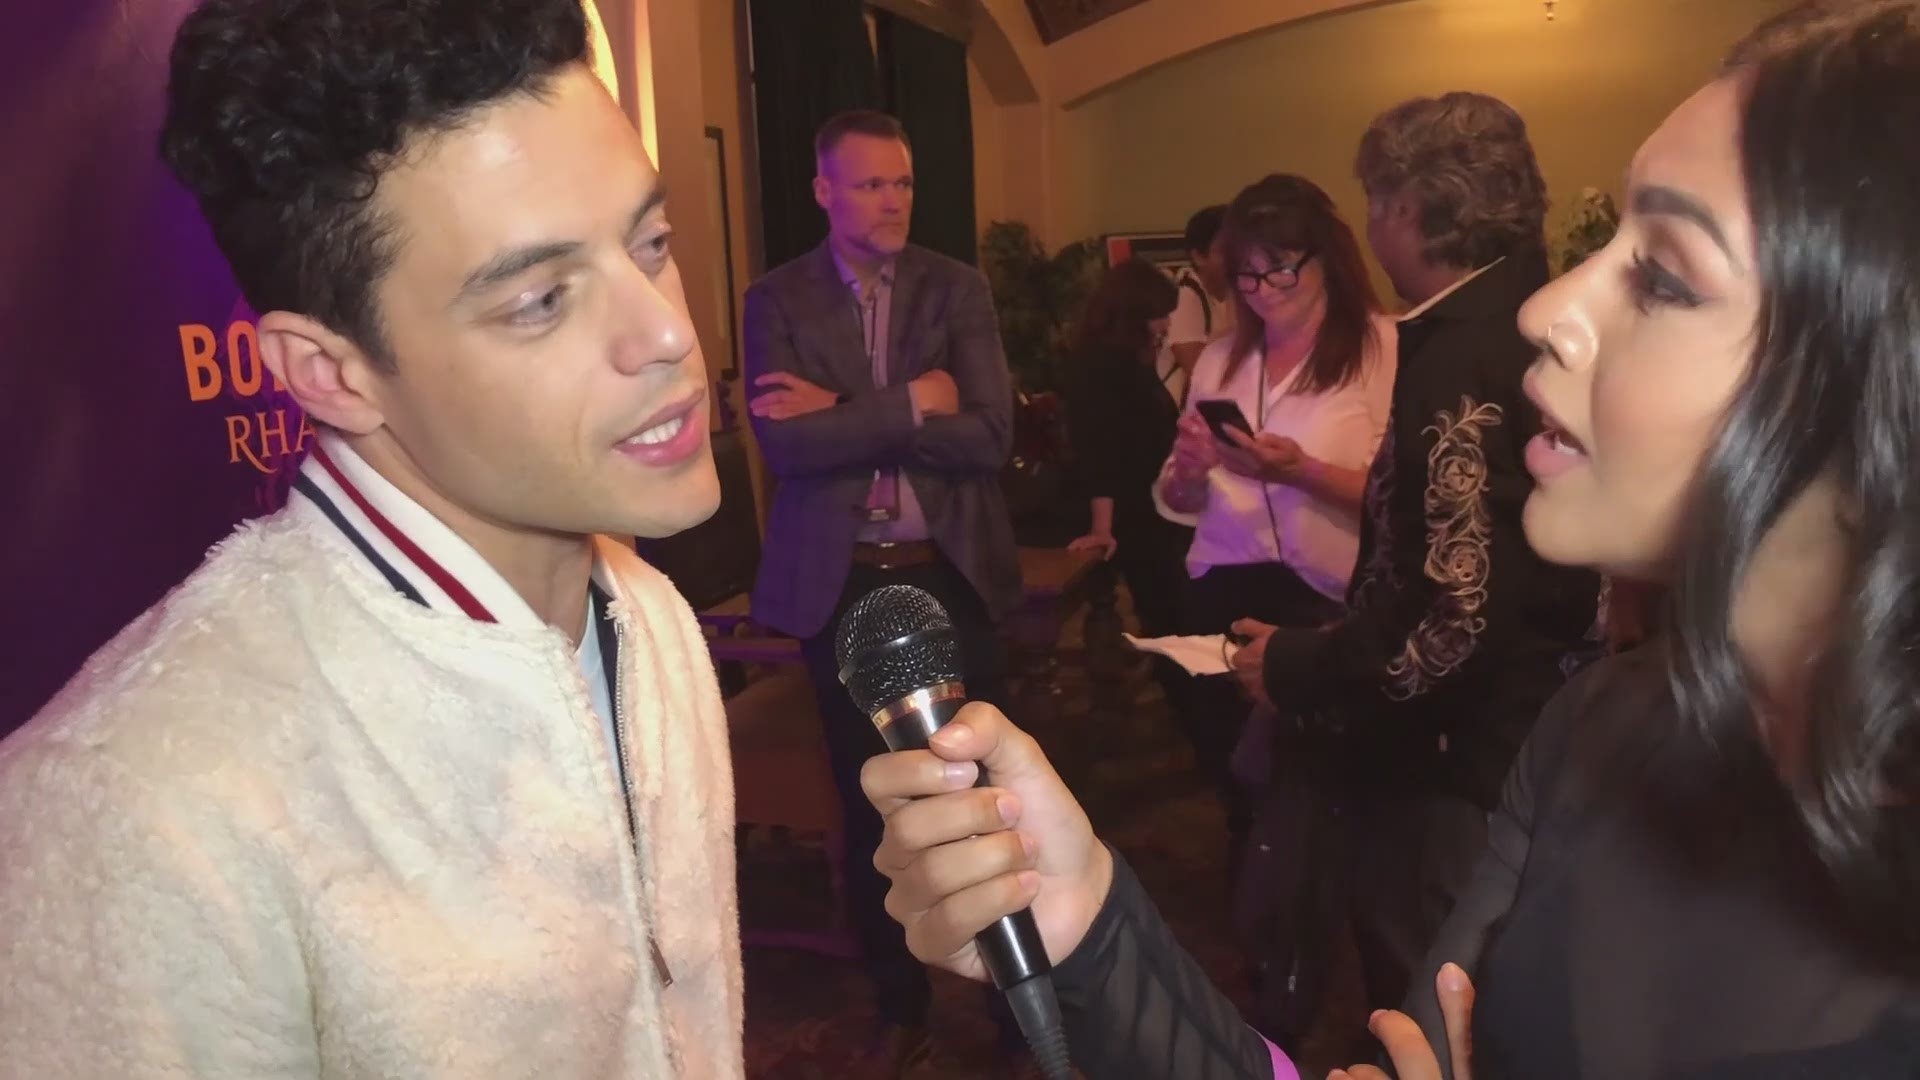 Rami Malek talks with Mariaagloriaa about the movie 'Bohemian Rhapsody' and the side of the Queen singer not everyone got to see. Also, what it meant to have the blessing of Freddie Mercury's family, and Rami's love of San Francisco.